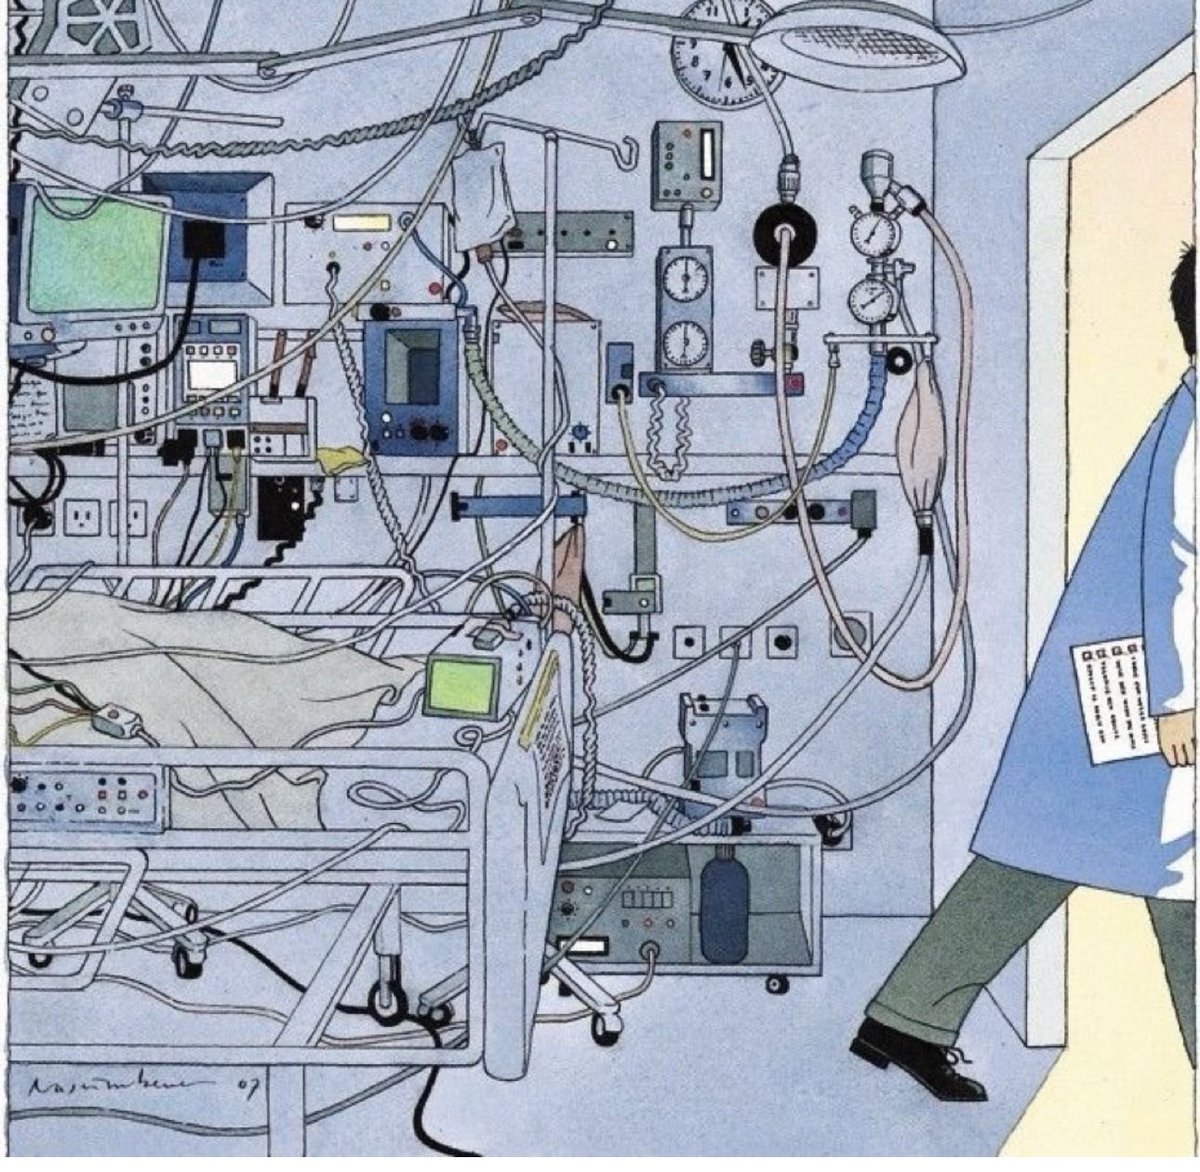 Can you name all 100 med devices or parts in this images ?